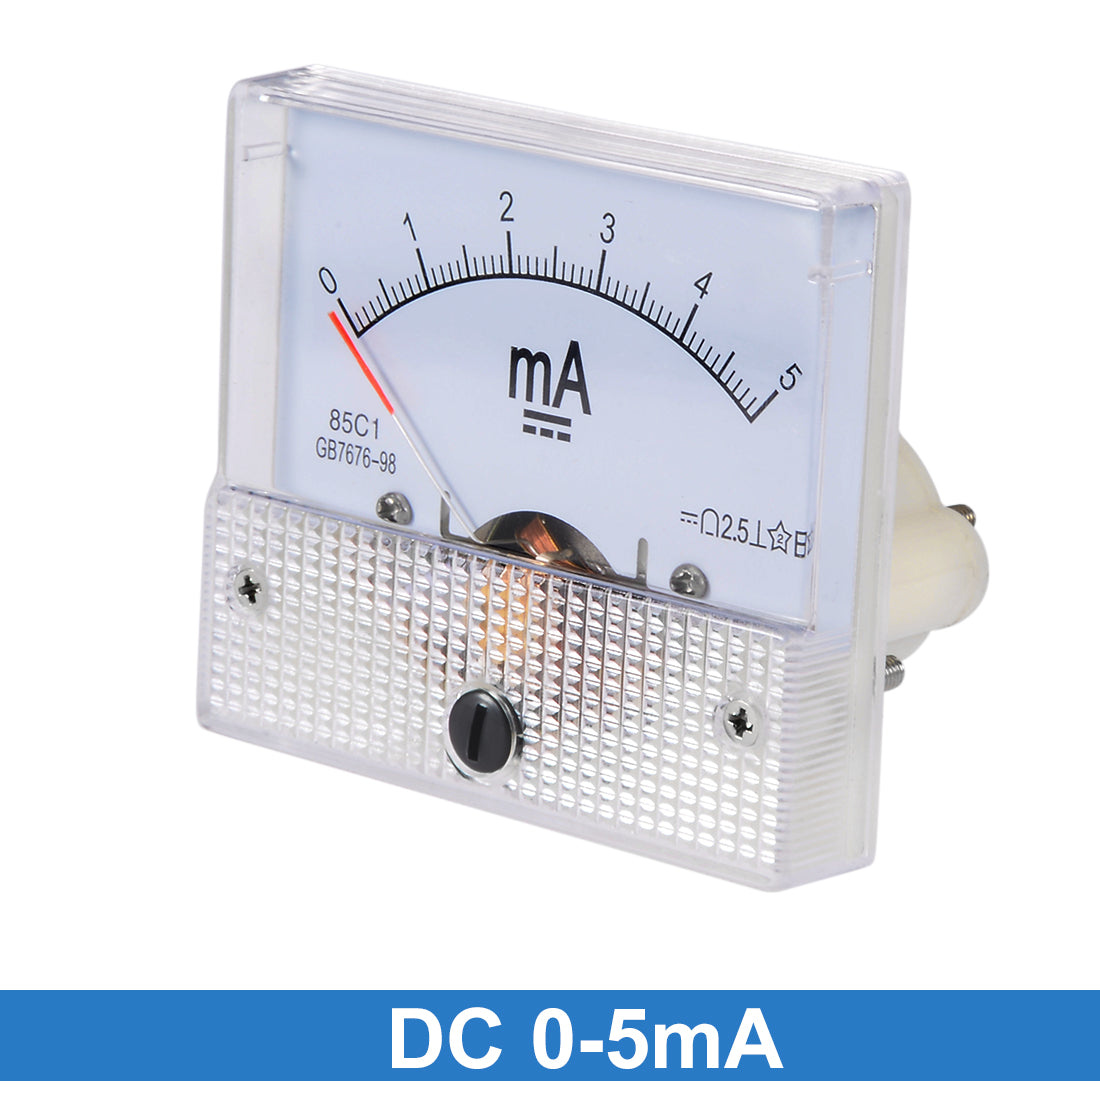 uxcell Uxcell 85C1 Analog Current Panel Meter DC 5mA Ammeter for Circuit Testing Ampere Tester Gauge 1 PCS